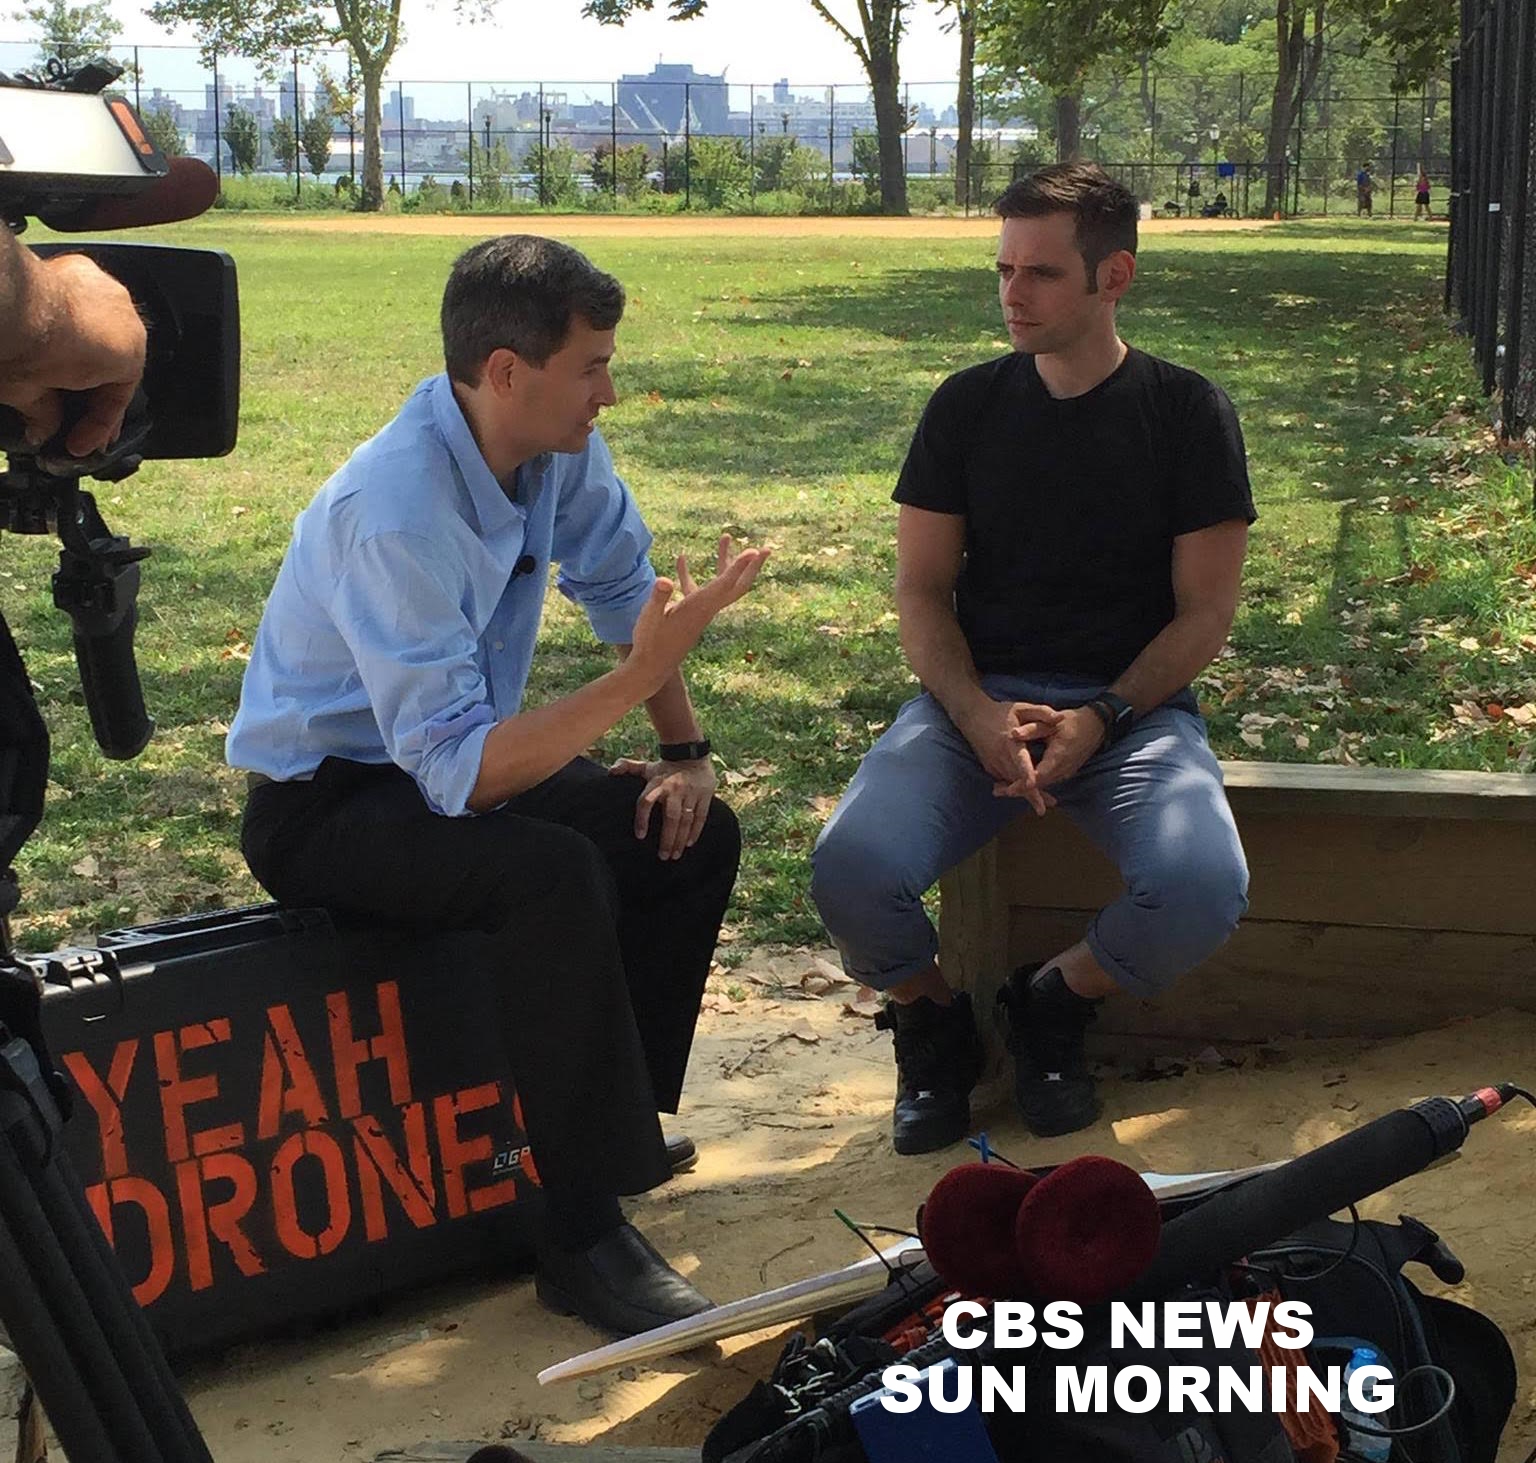 We got to talk drones with David Pogue...